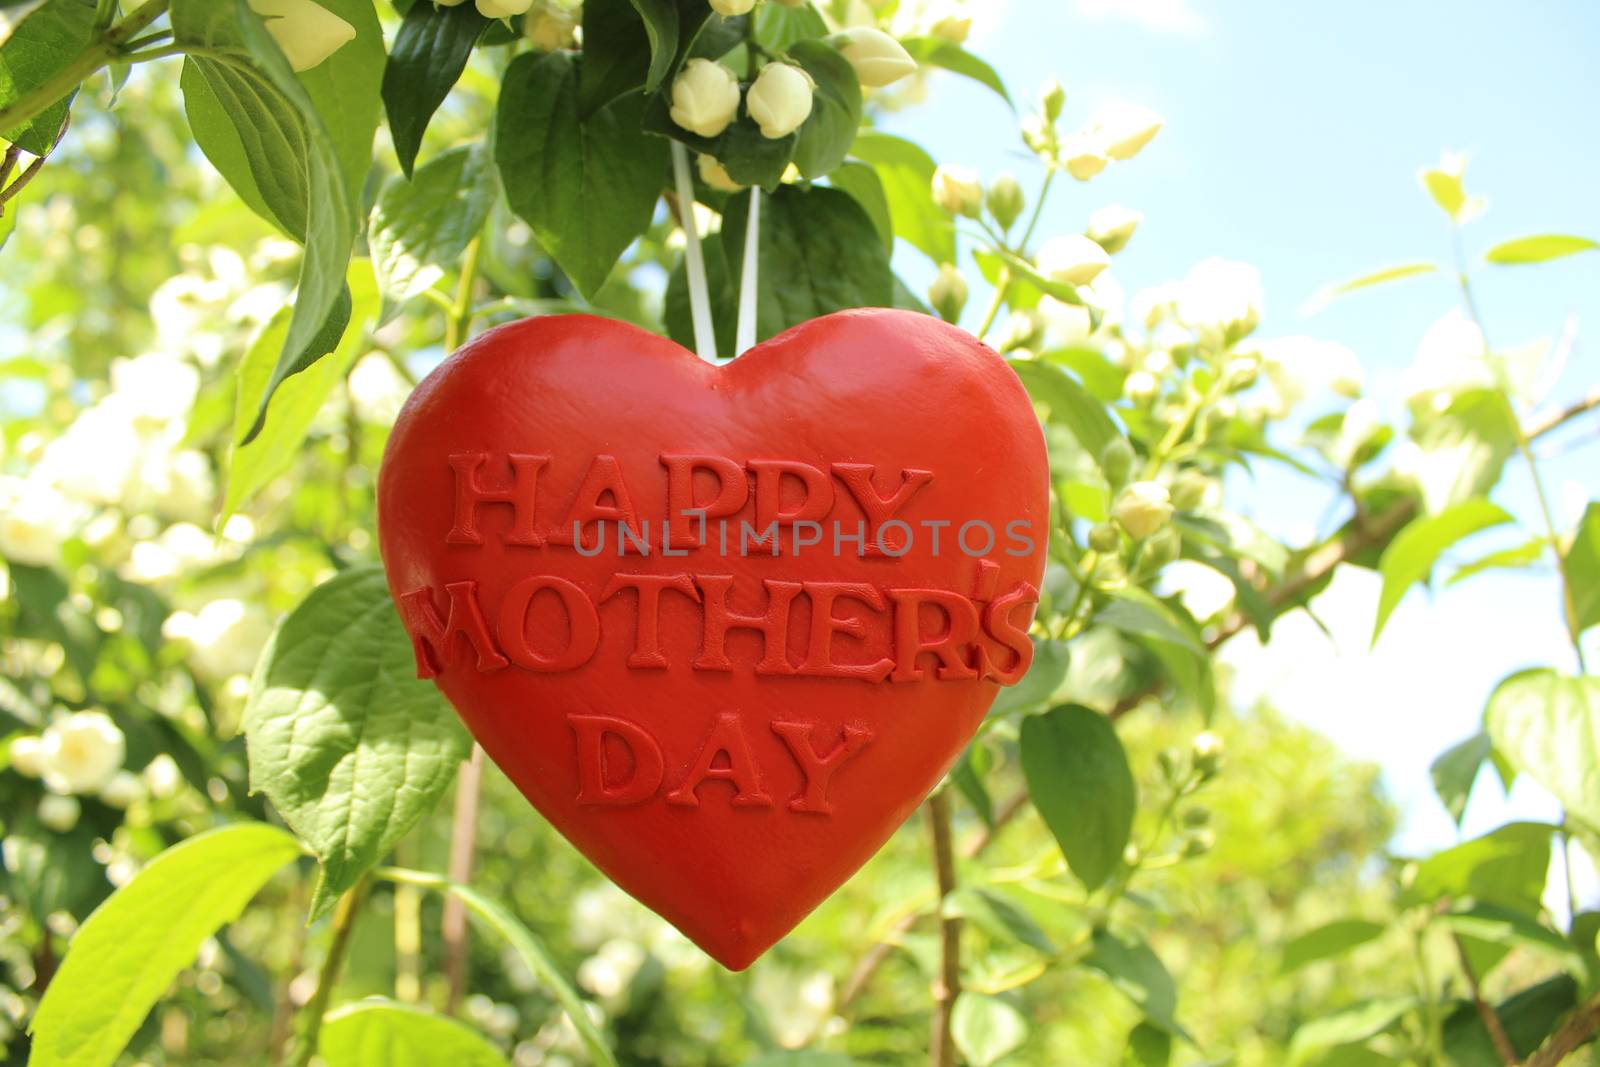 The picture shows Happy Mothers Day greetings.